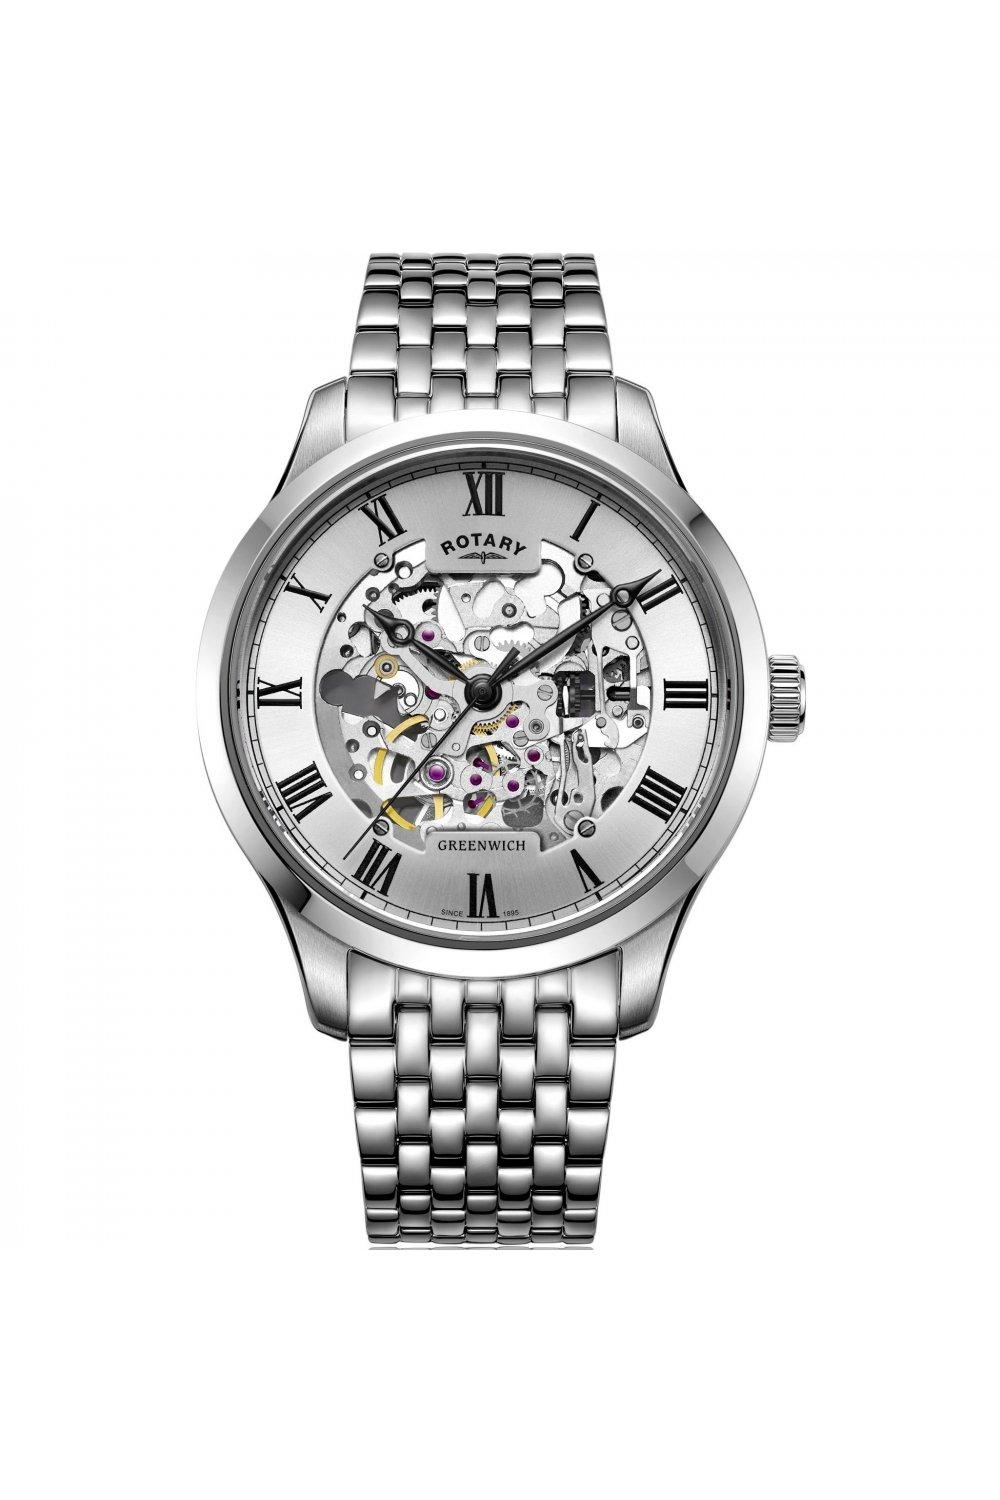 Watches | Stainless Steel Classic Analogue Automatic Watch - Gb02940/06 ...